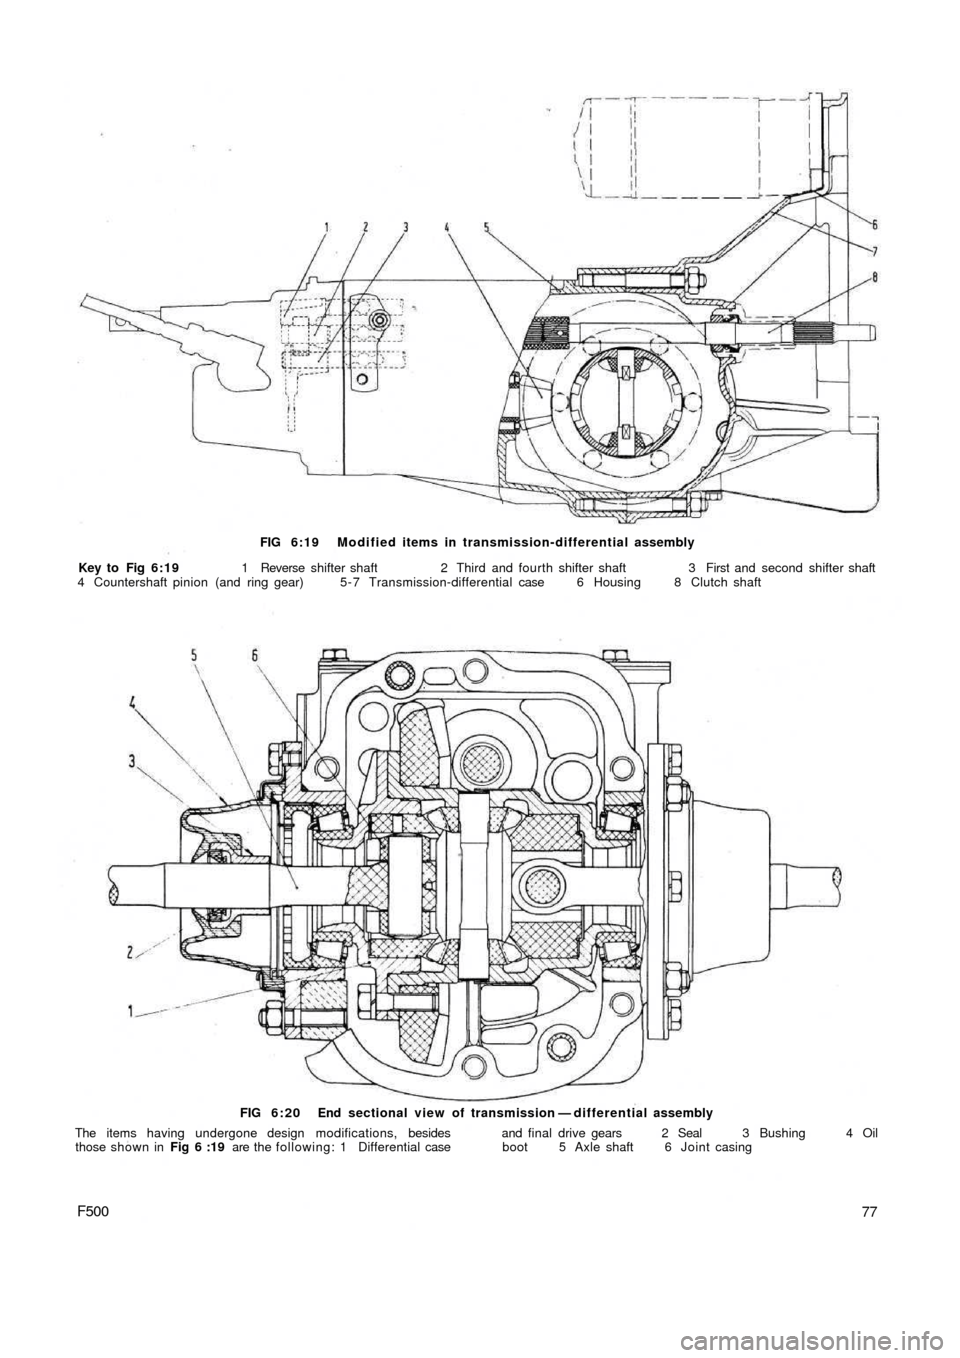 FIAT 500 1971 1.G Workshop Manual FIG 6:19 Modified items in transmission-differential assembly
Key to  Fig  6:19 1 Reverse shifter shaft  2 Third and fourth shifter shaft  3 First and second shifter shaft
4 Countershaft pinion (and r